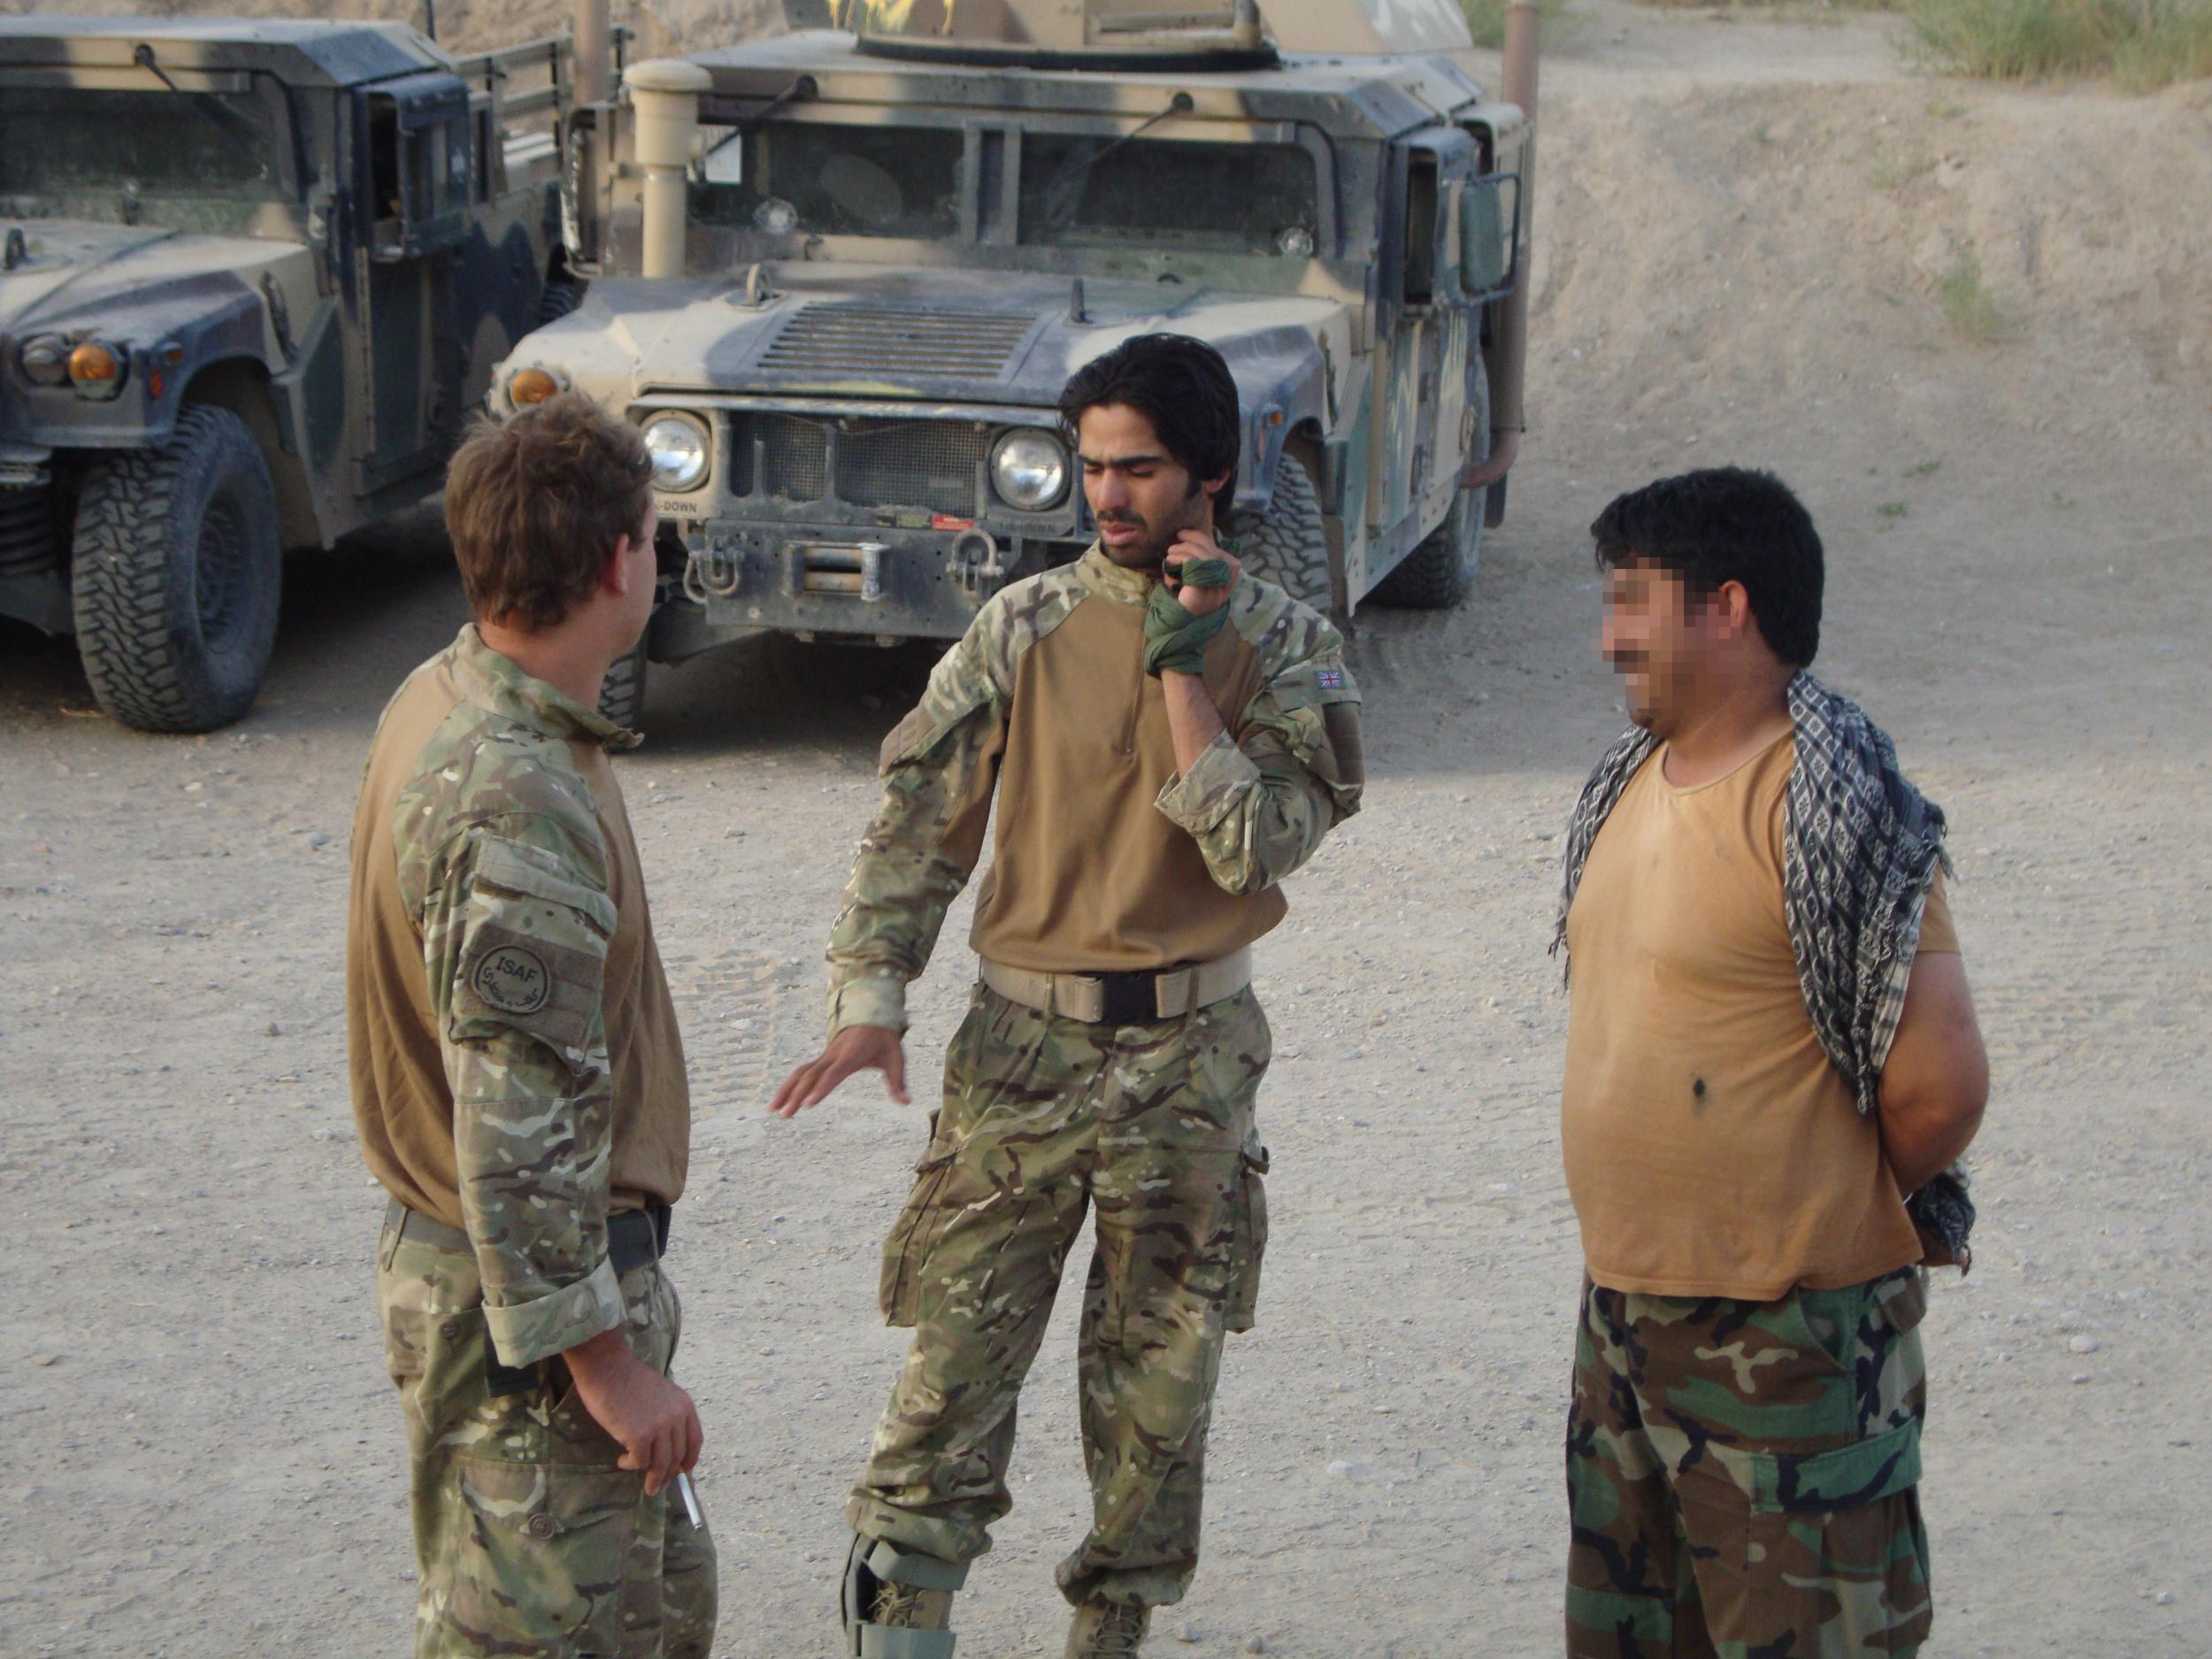 Mr Husseinkhel (centre) worked as an interpreter for a British Army squadron in Helmand led by Mr Locke (left) in Afghanistan in 2011. He has now, after nearly two years in the UK, been told he is to be removed from the country within days